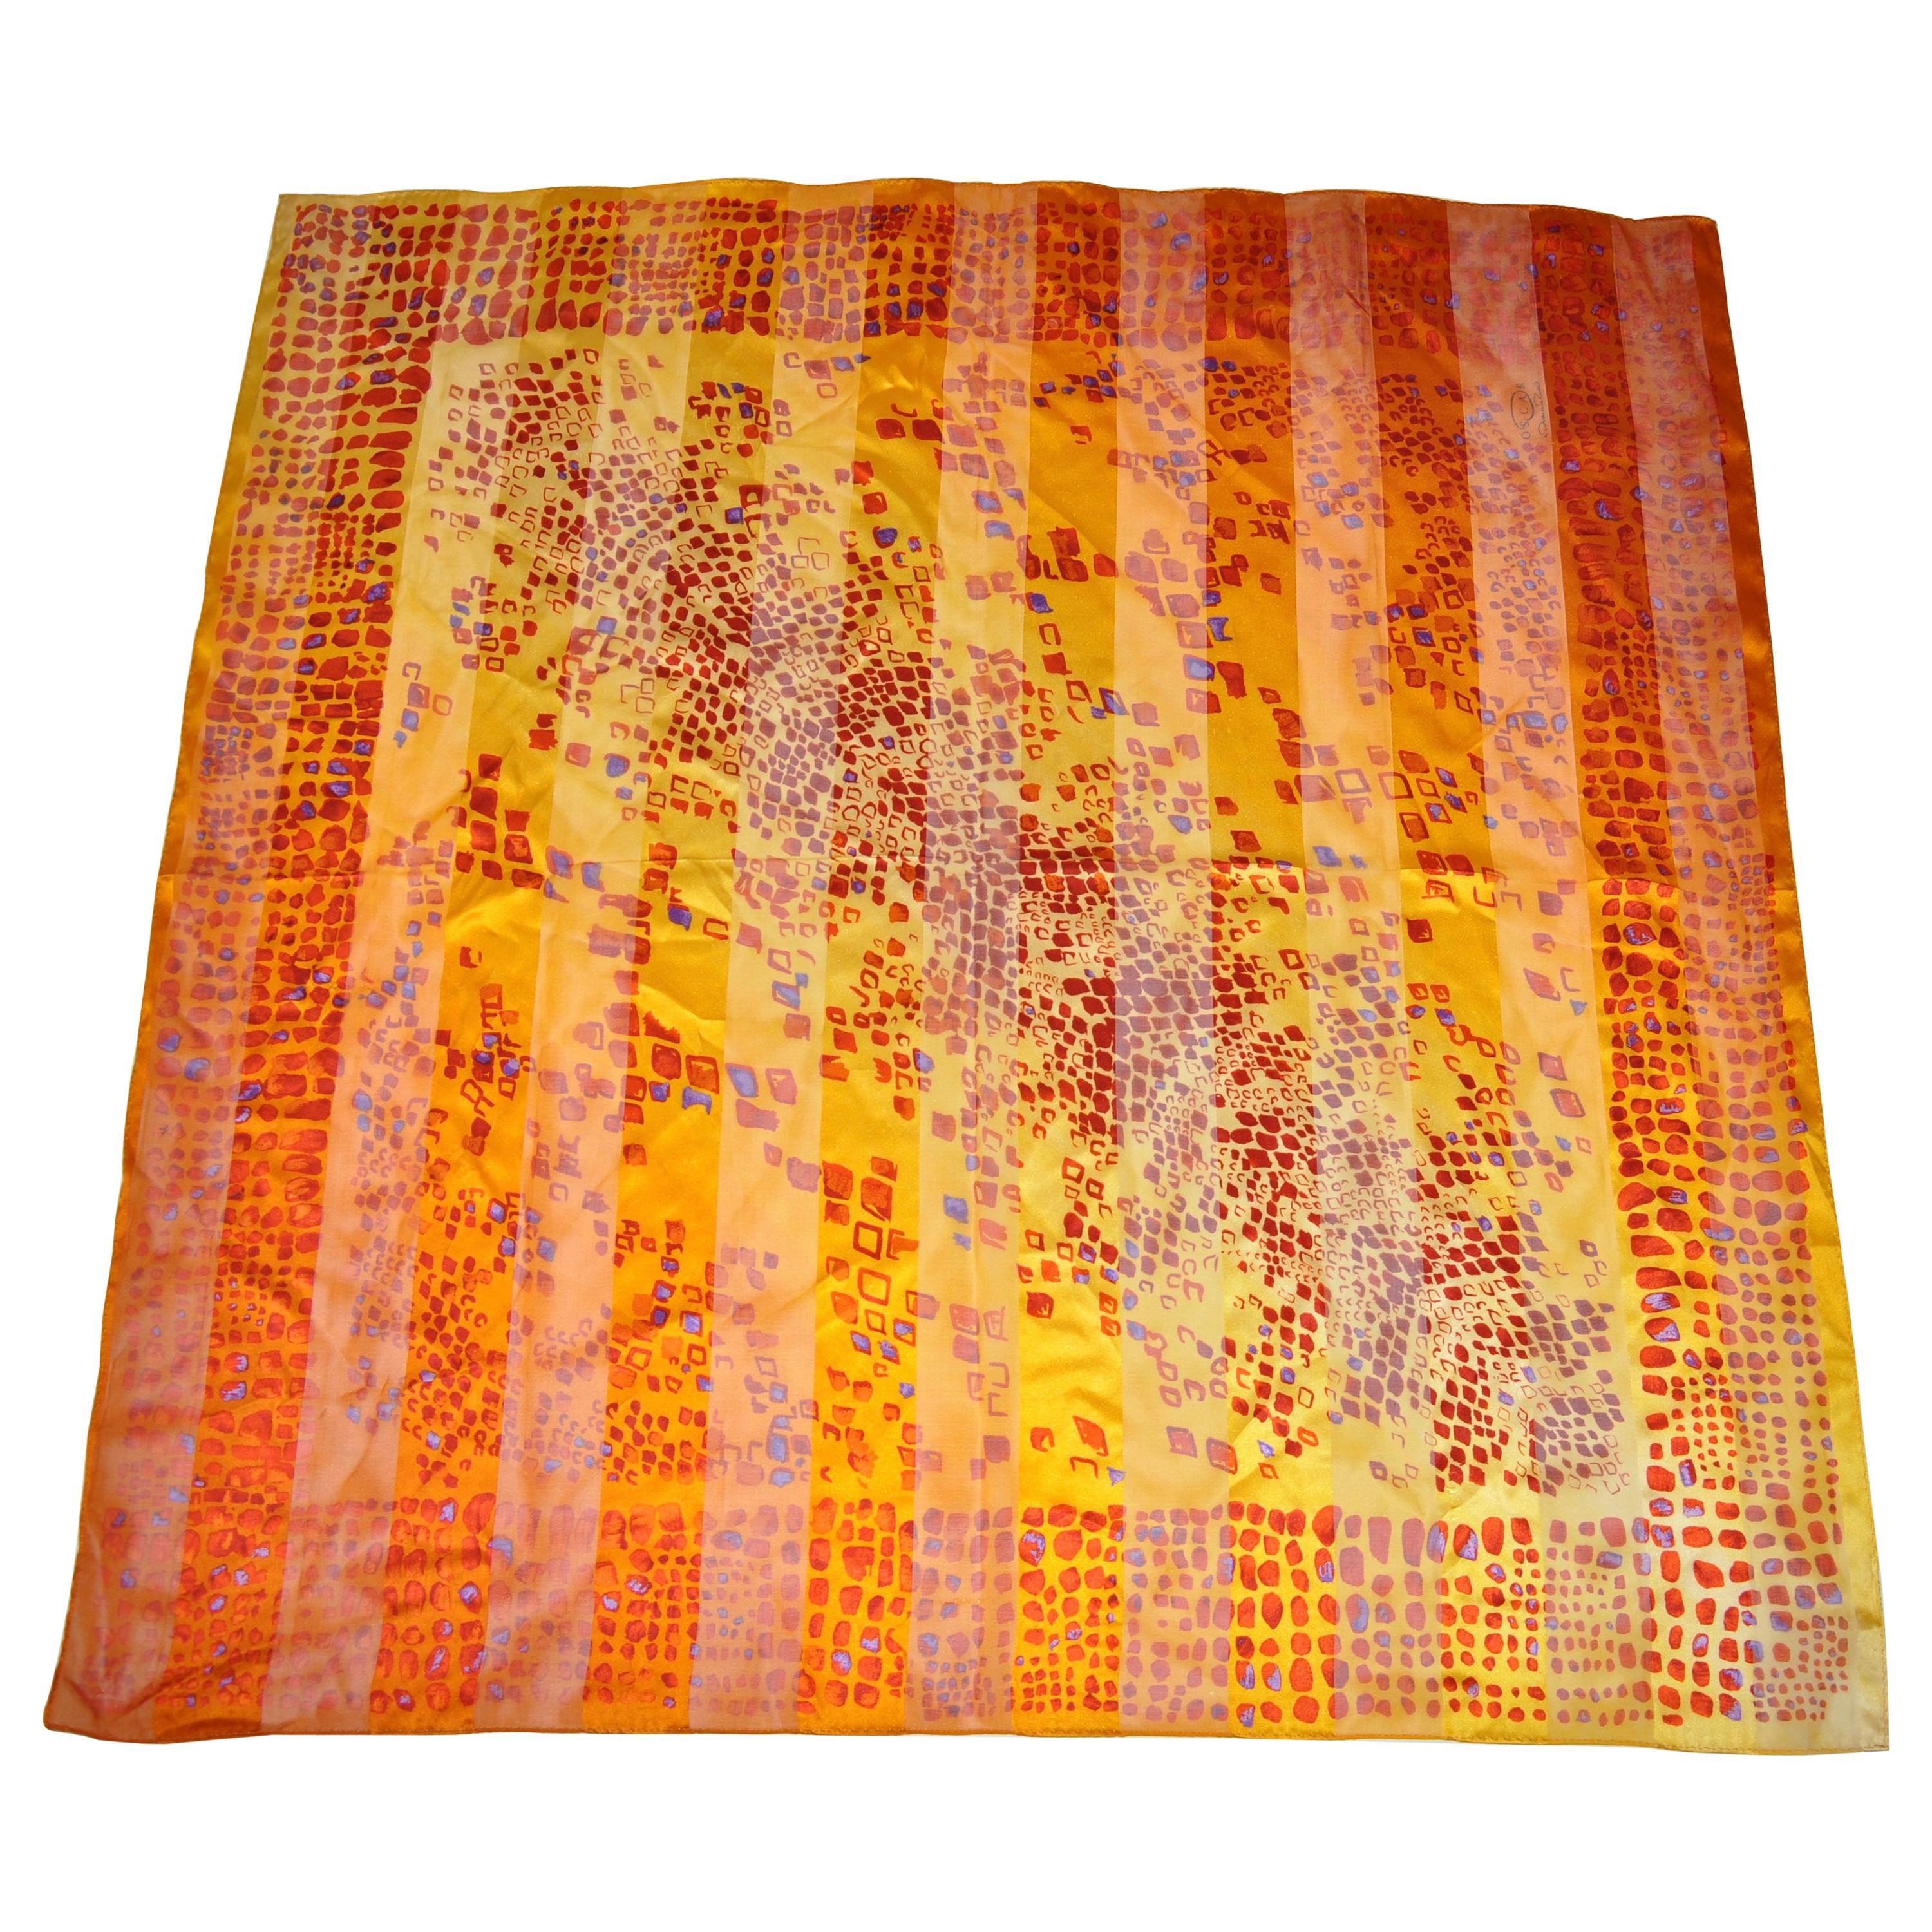 Warm Shades Of Golden Tangerine & Gold Silk and Chiffon "Pebbles" Scarf For Sale